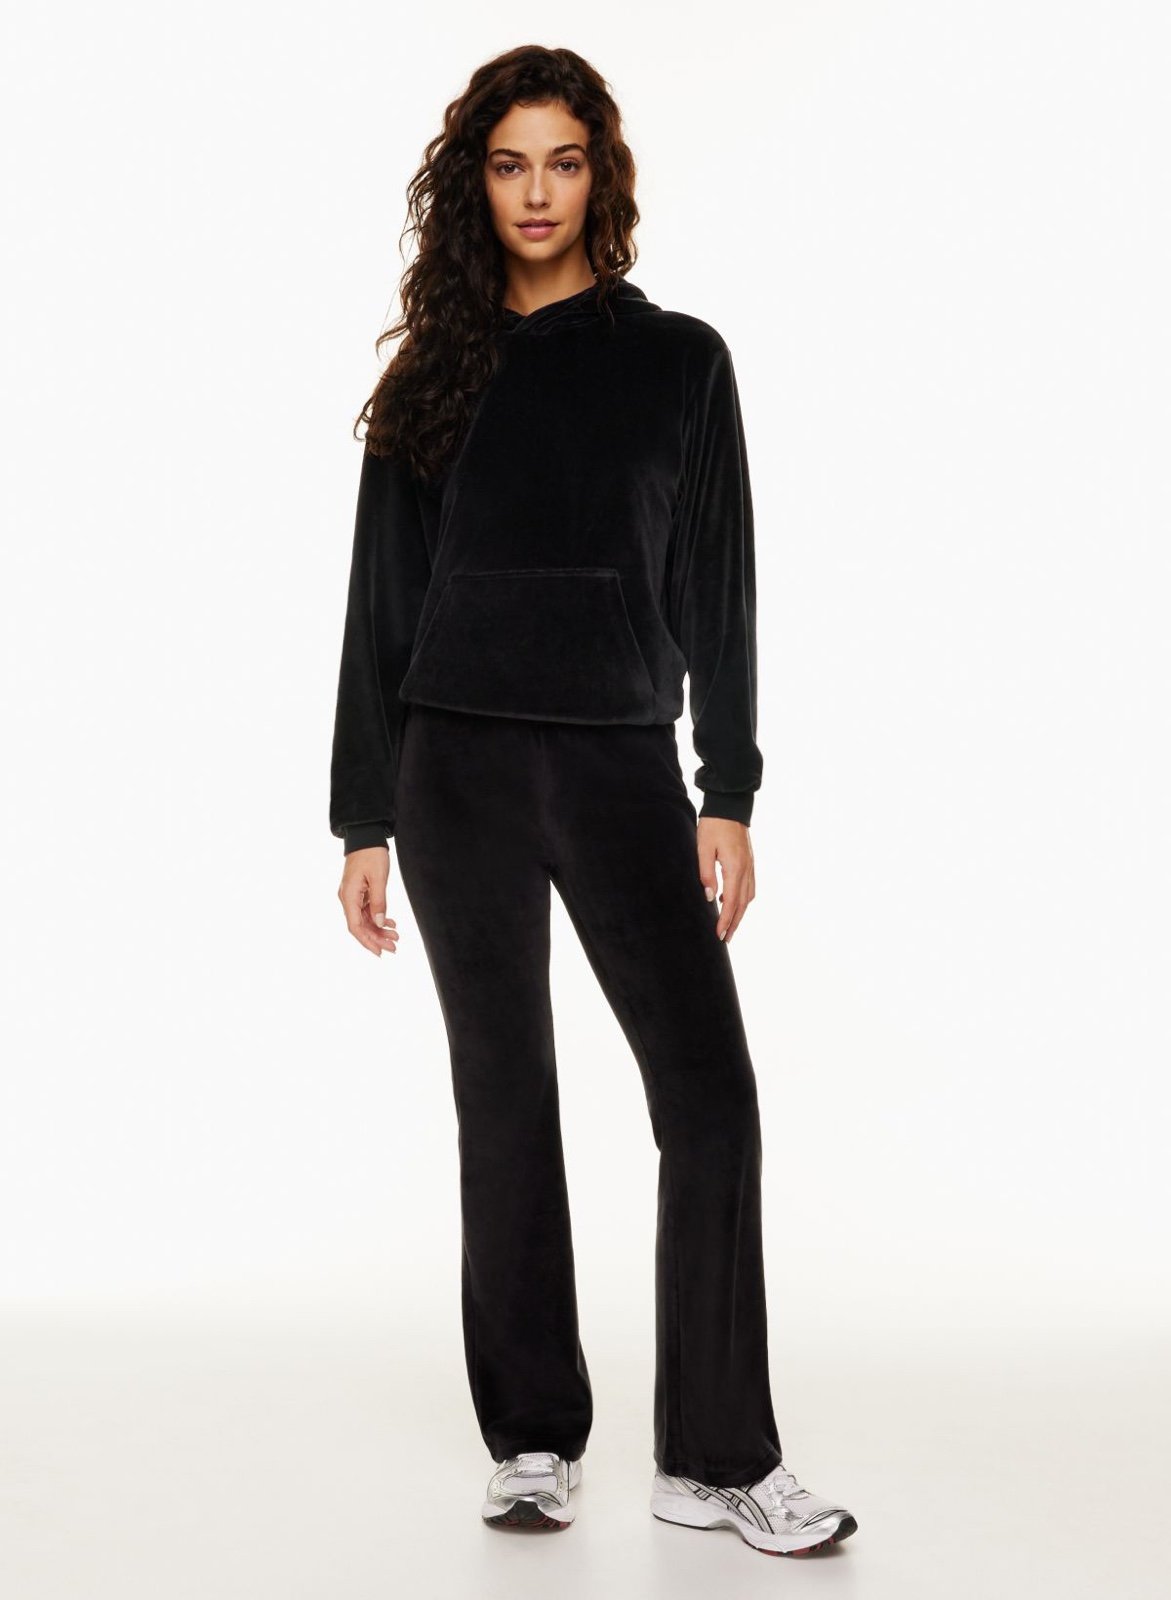 cheapest place to buy  Aritzia Tna Sommer Velour Pant i